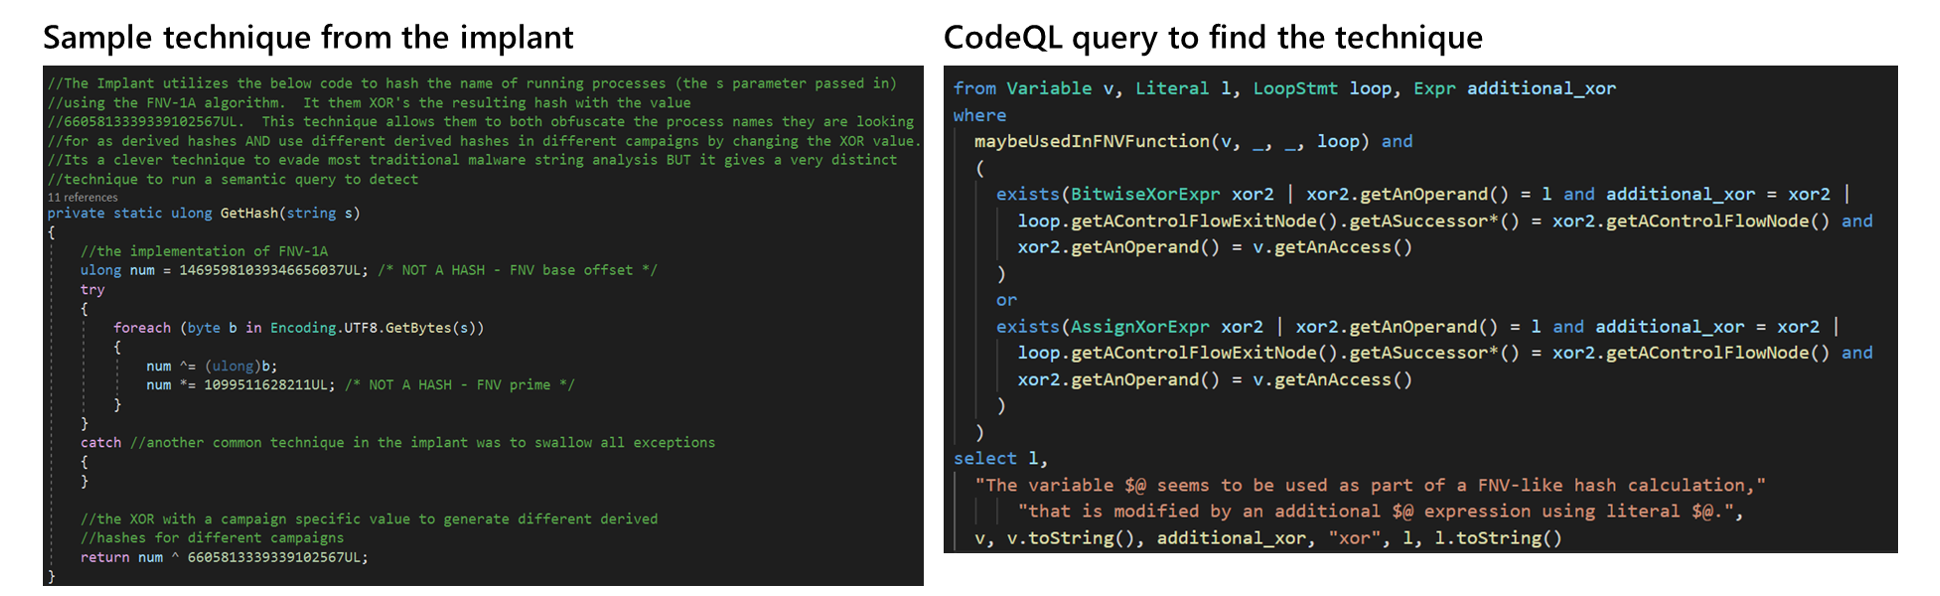 Sample technique from implant with corresponding CodeQL query